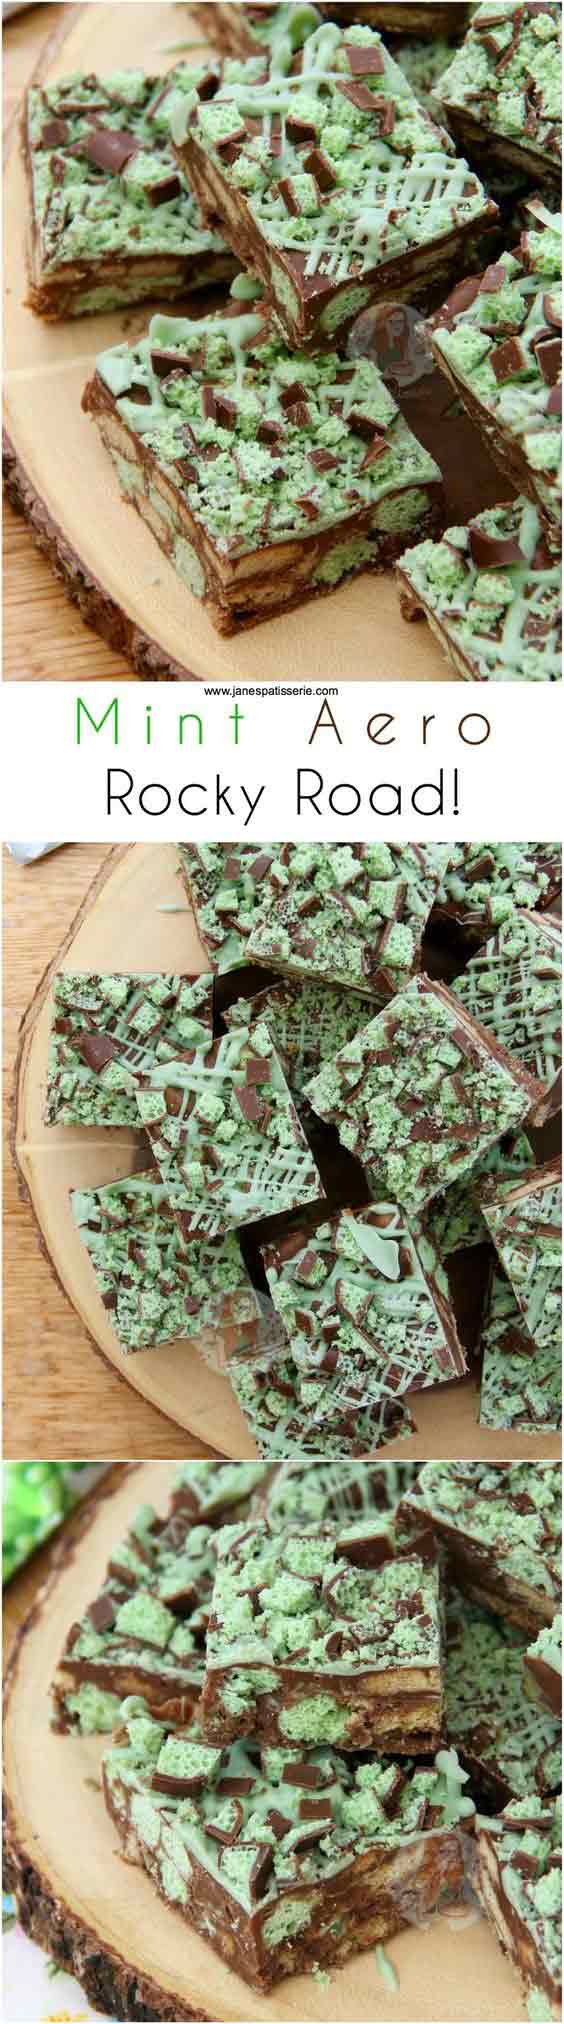 Christmas peppermint recipes - mint rocky road #peppermint